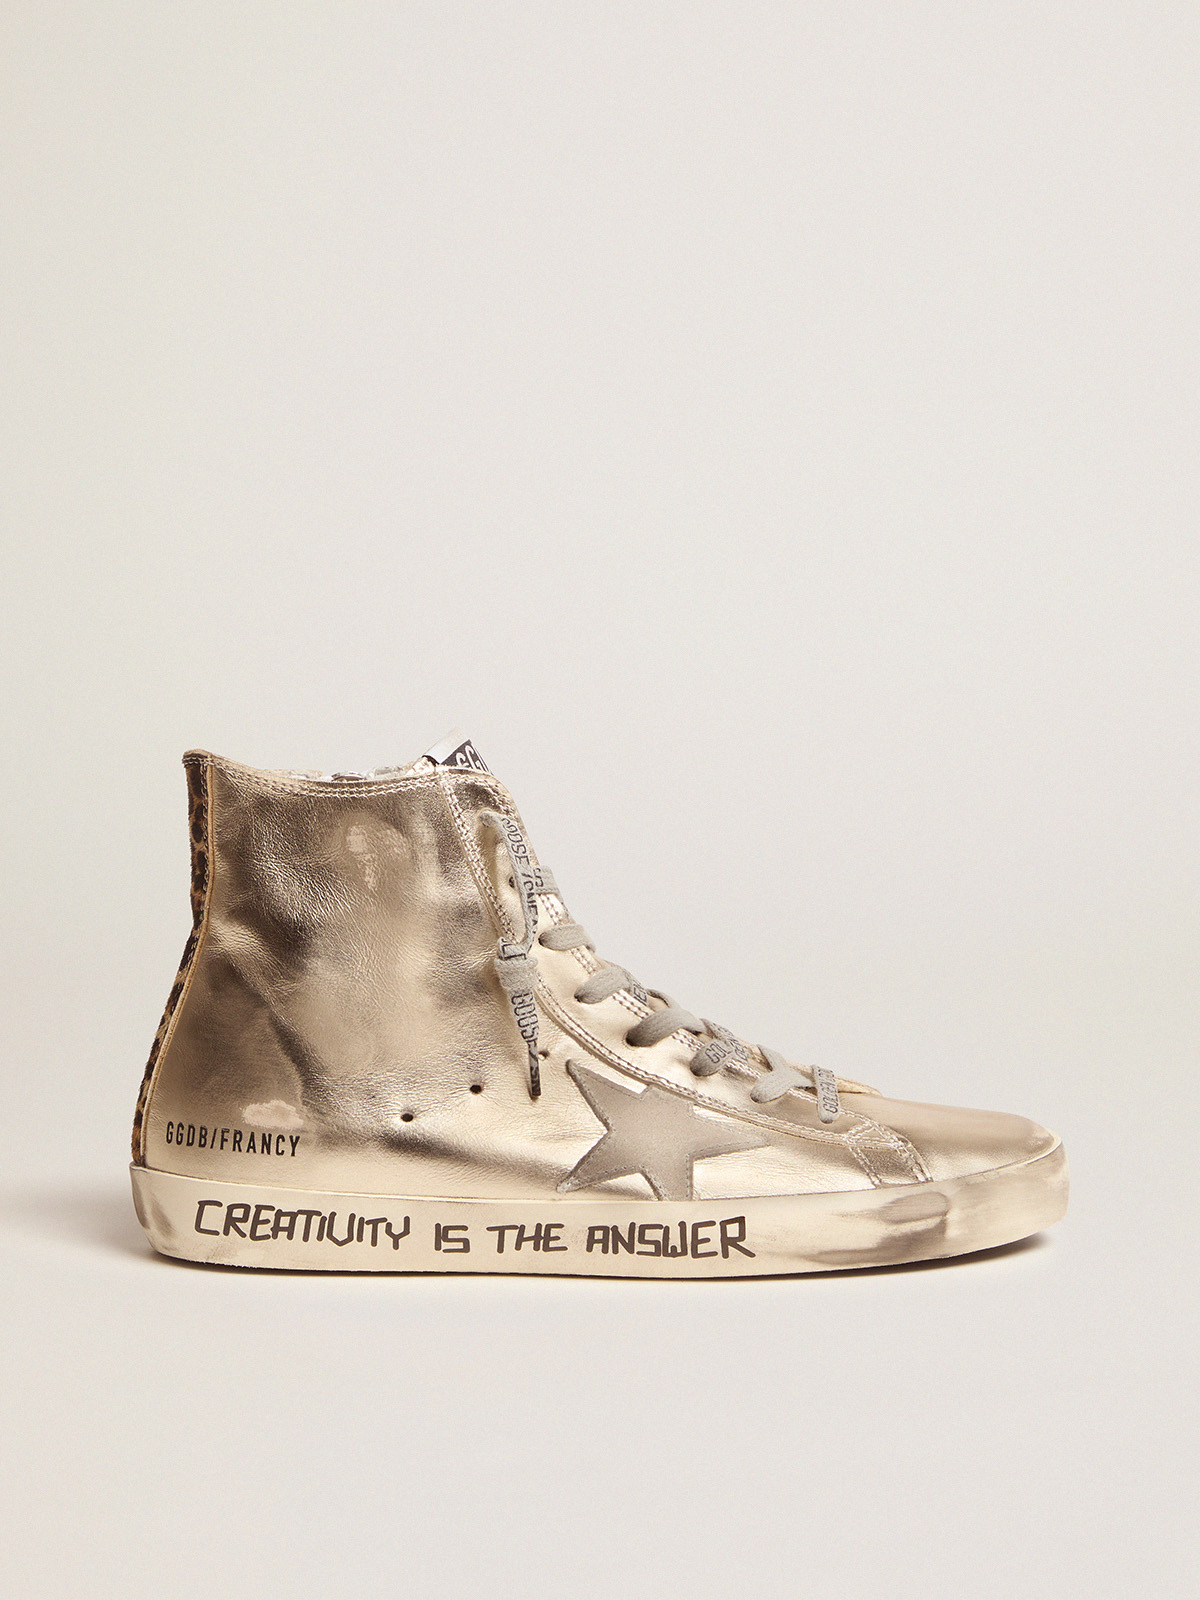 Gold Francy sneakers with lettering and leopard-print | Golden Goose